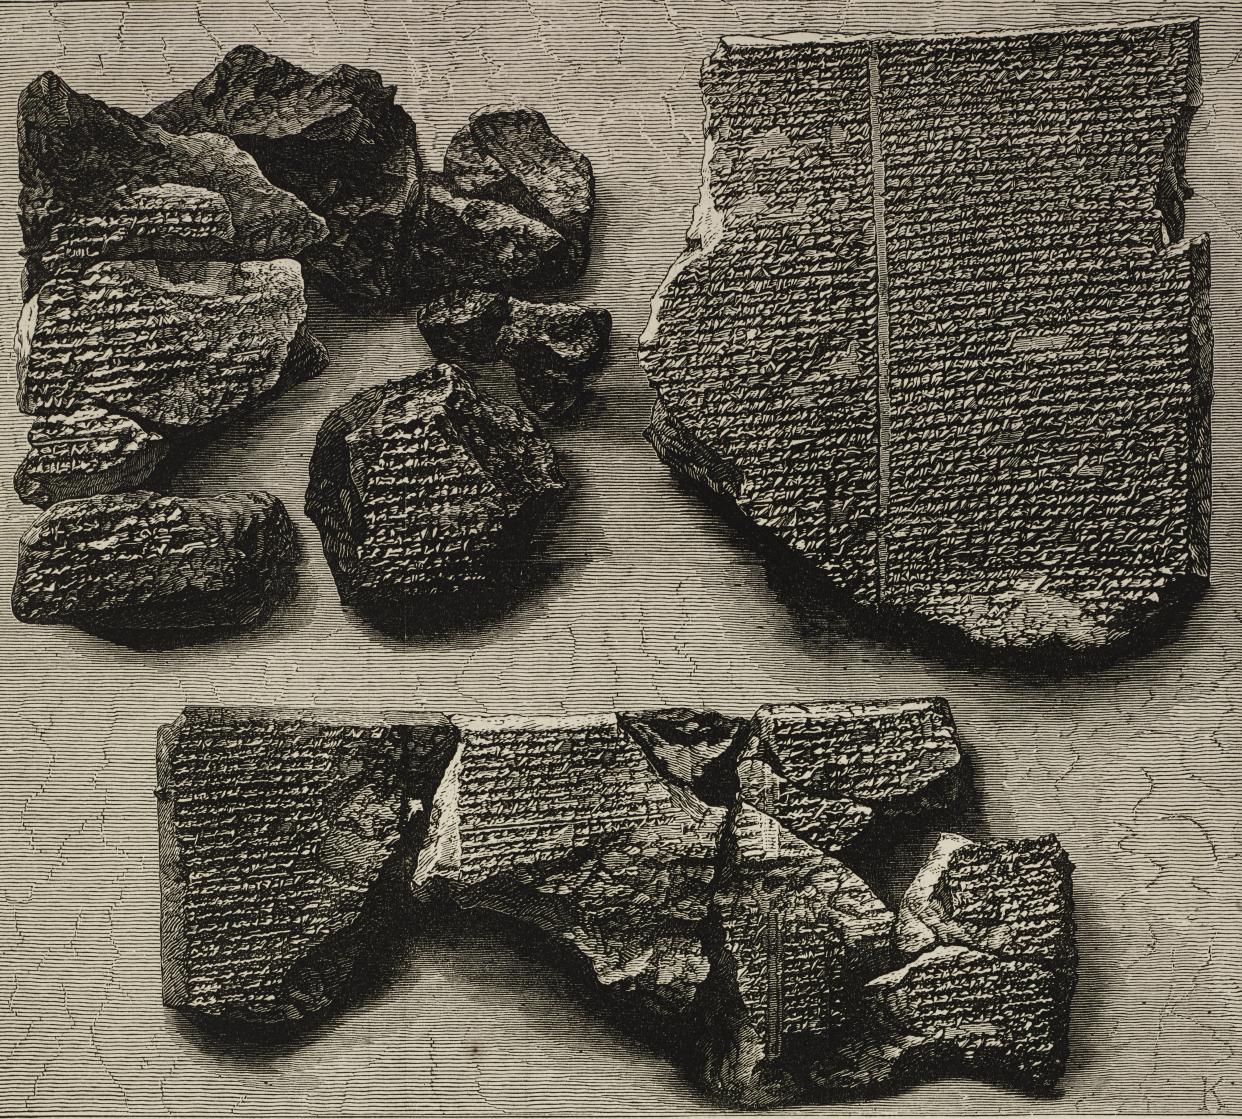 Inscribed stone, giving an account of the Great Flood, Epic of Gilgamesh tablet, from Nineveh, illustration from the magazine The Illustrated London News, volume LXIII, November 15, 1873.